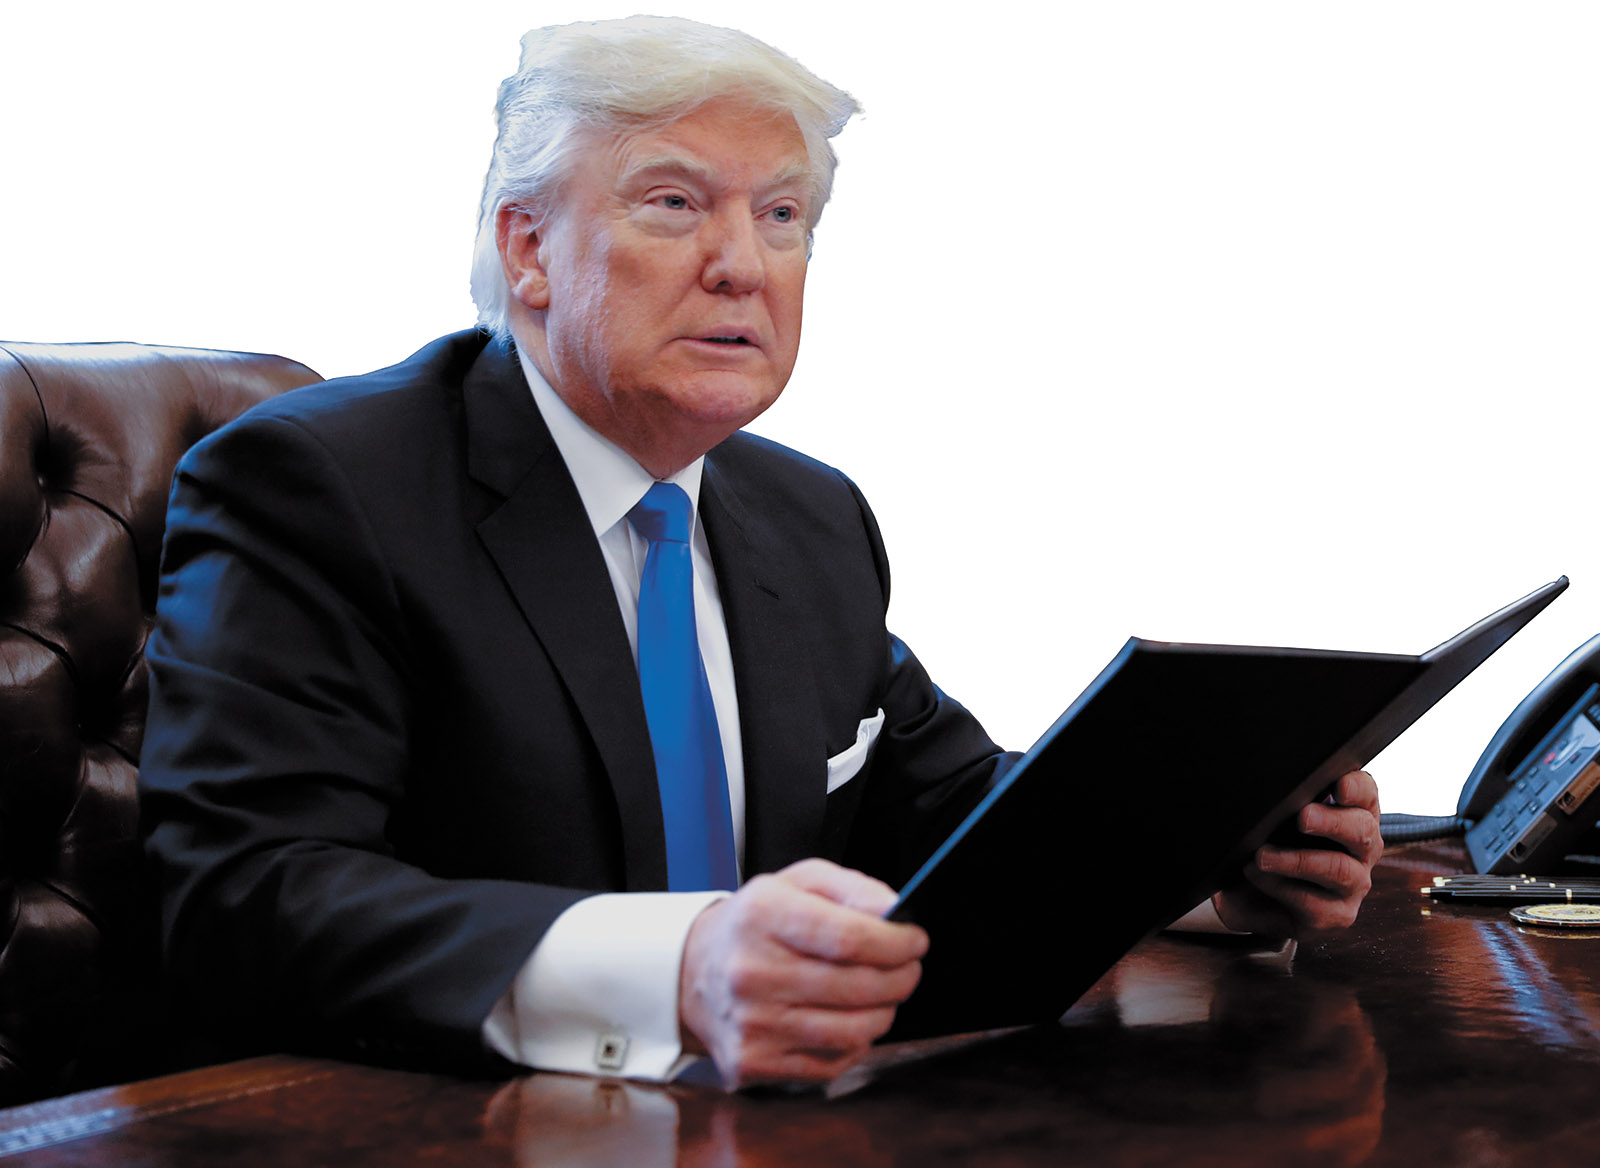 President Trump in the Oval Office, signing an executive order on oil pipelines, January 2017